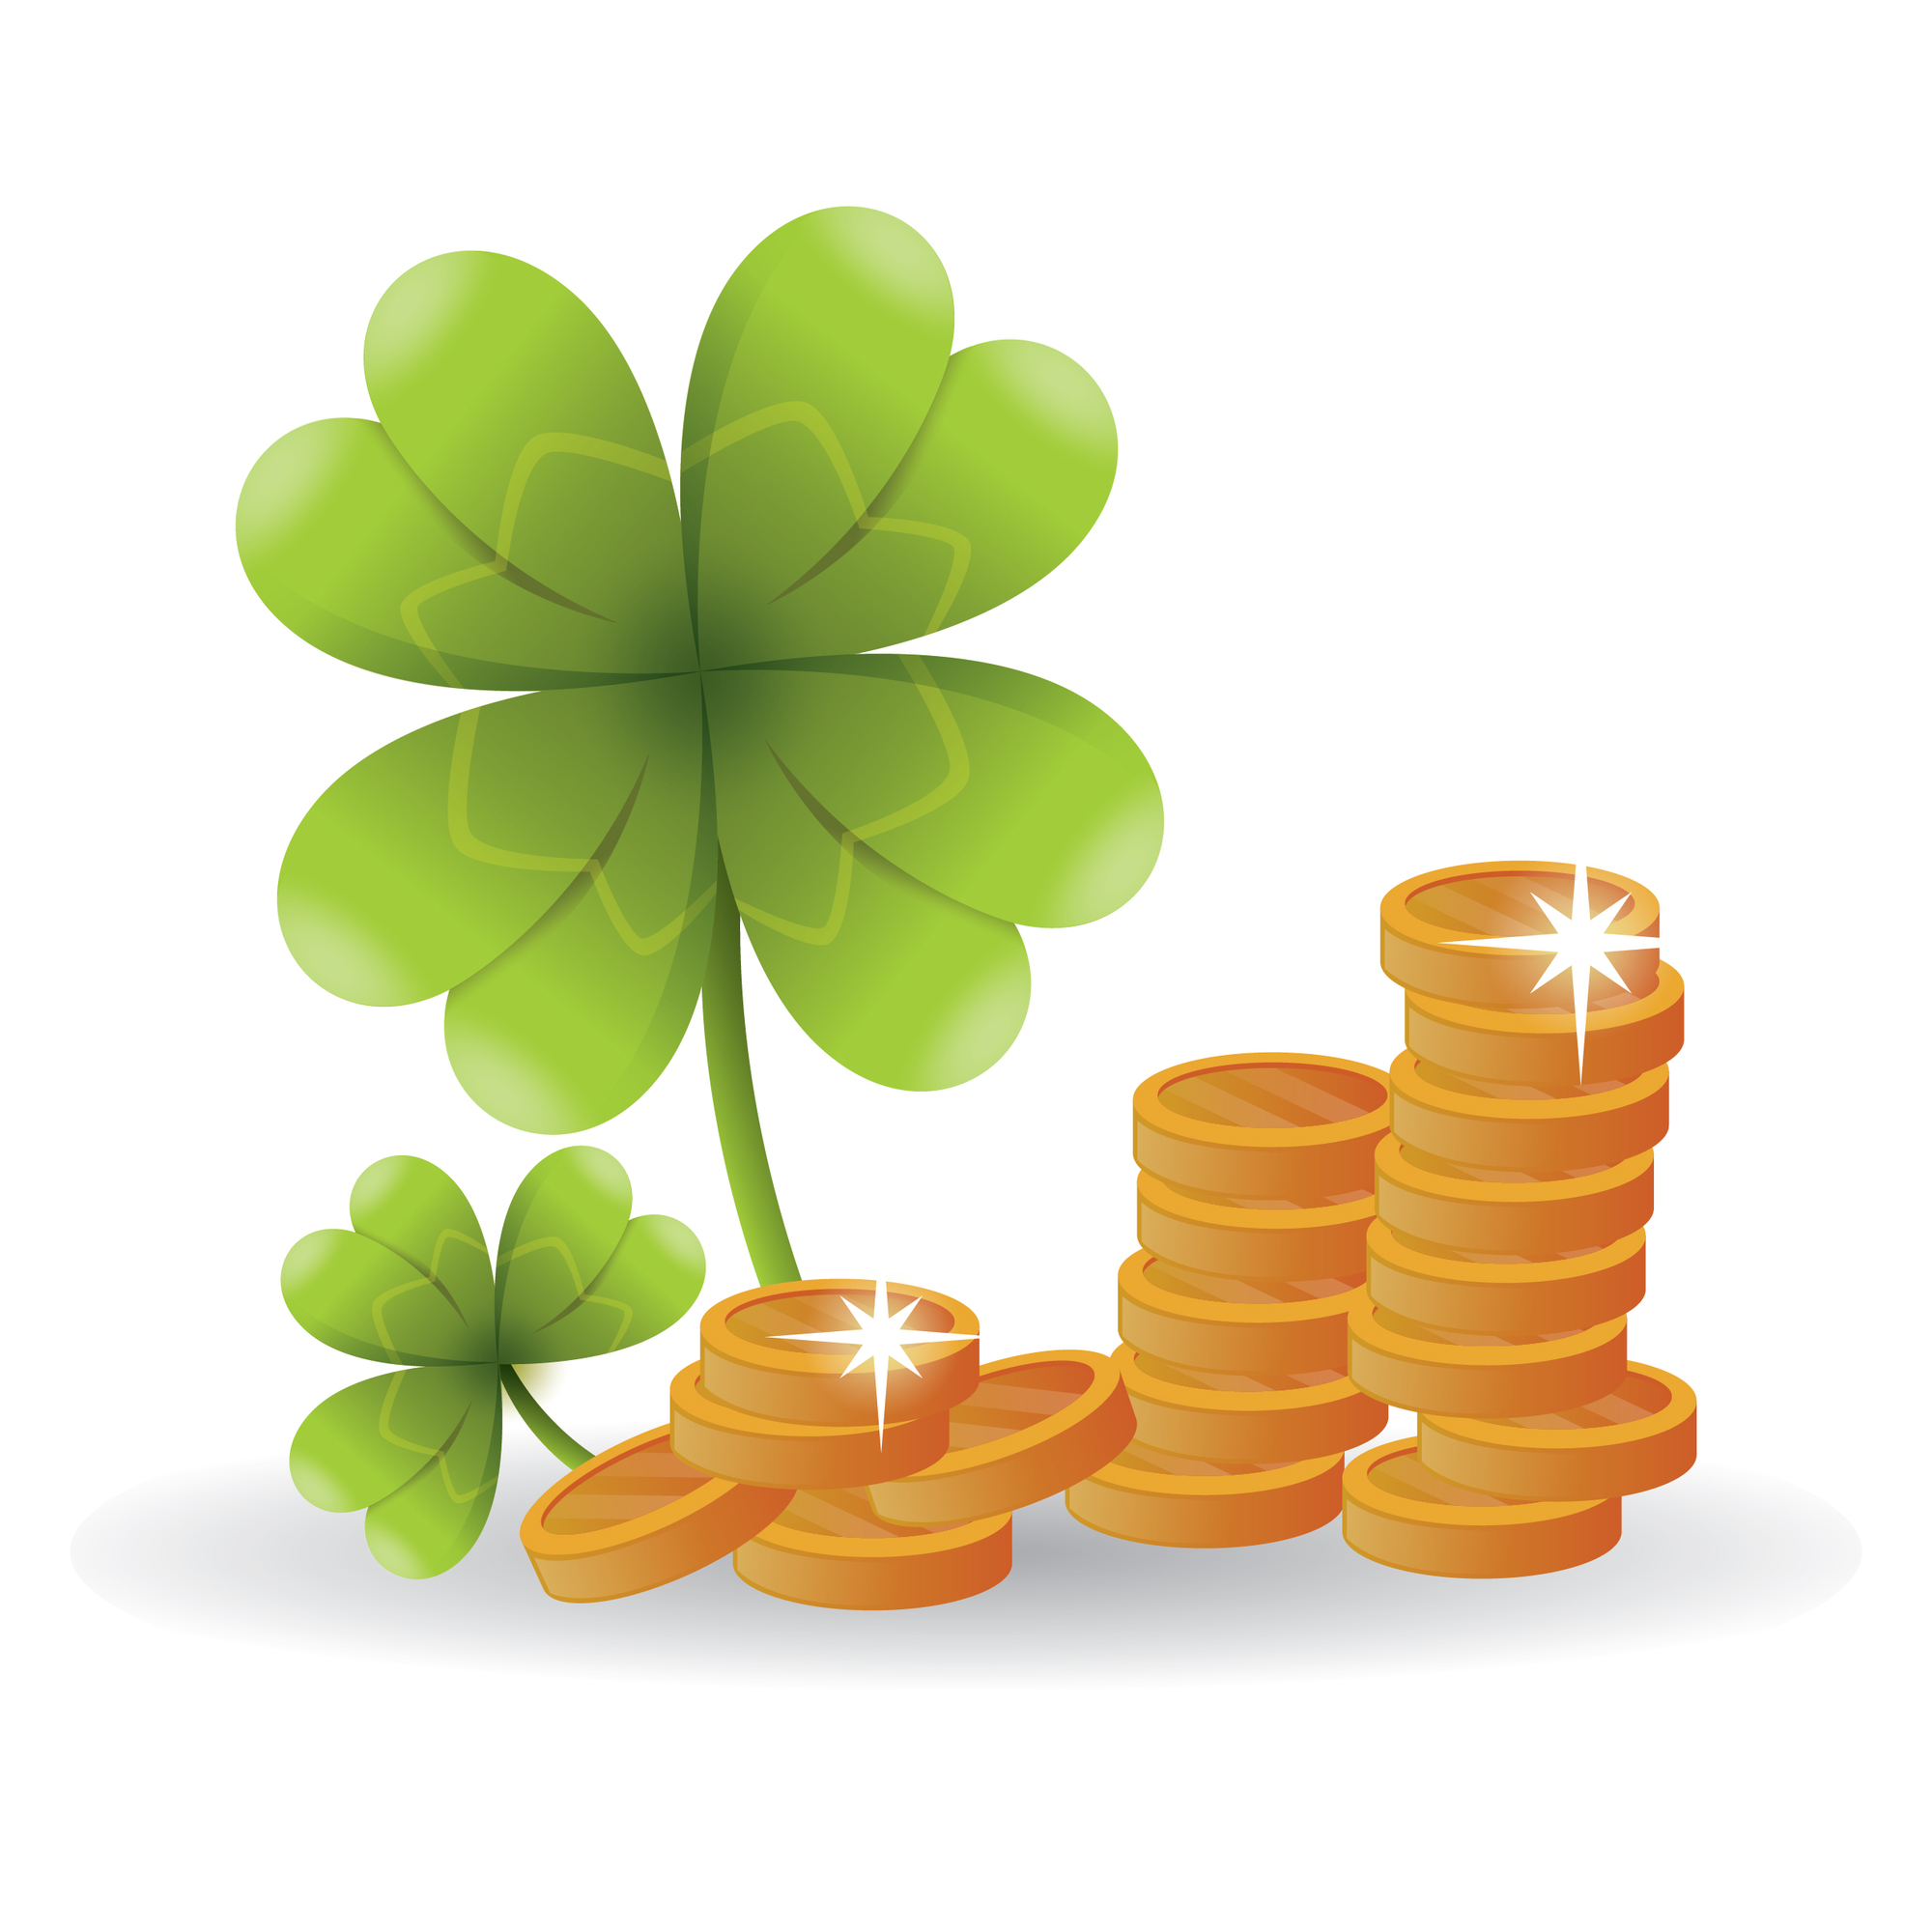 Are You Lucky? This Matters to Business